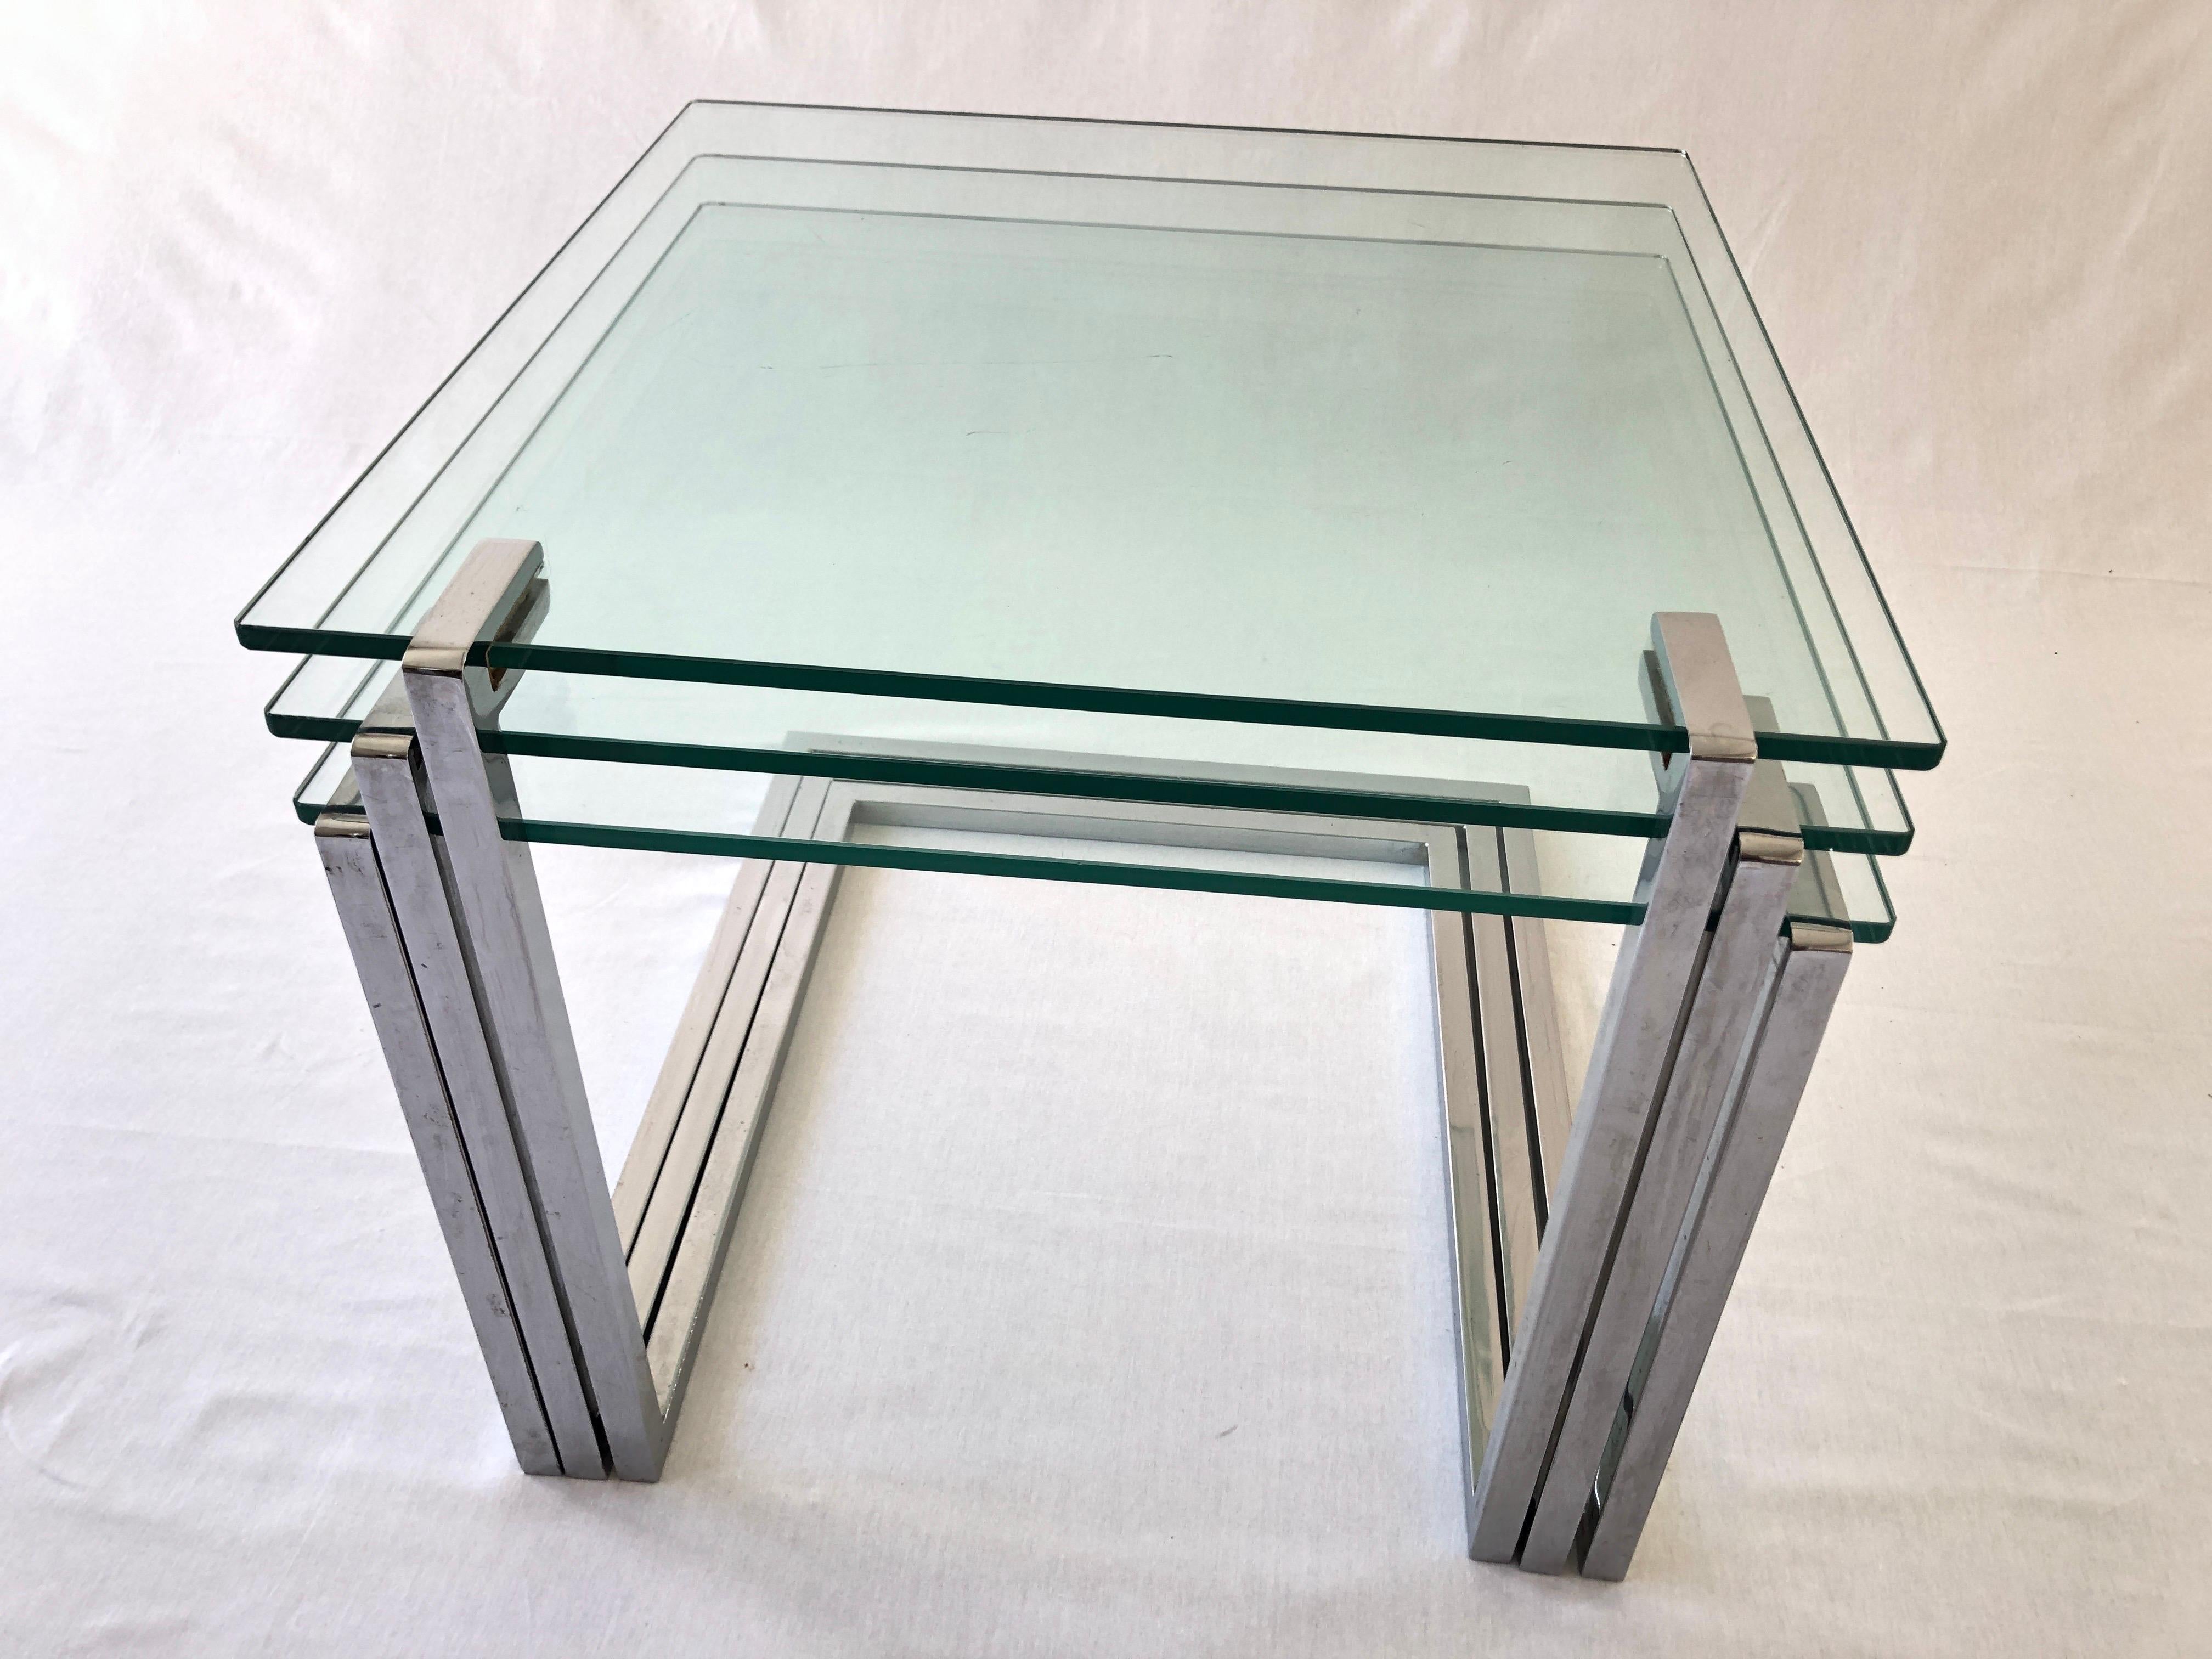 Chrome and Thick Glass Set of 3 Nesting Tables, 1970s, Germany For Sale 4